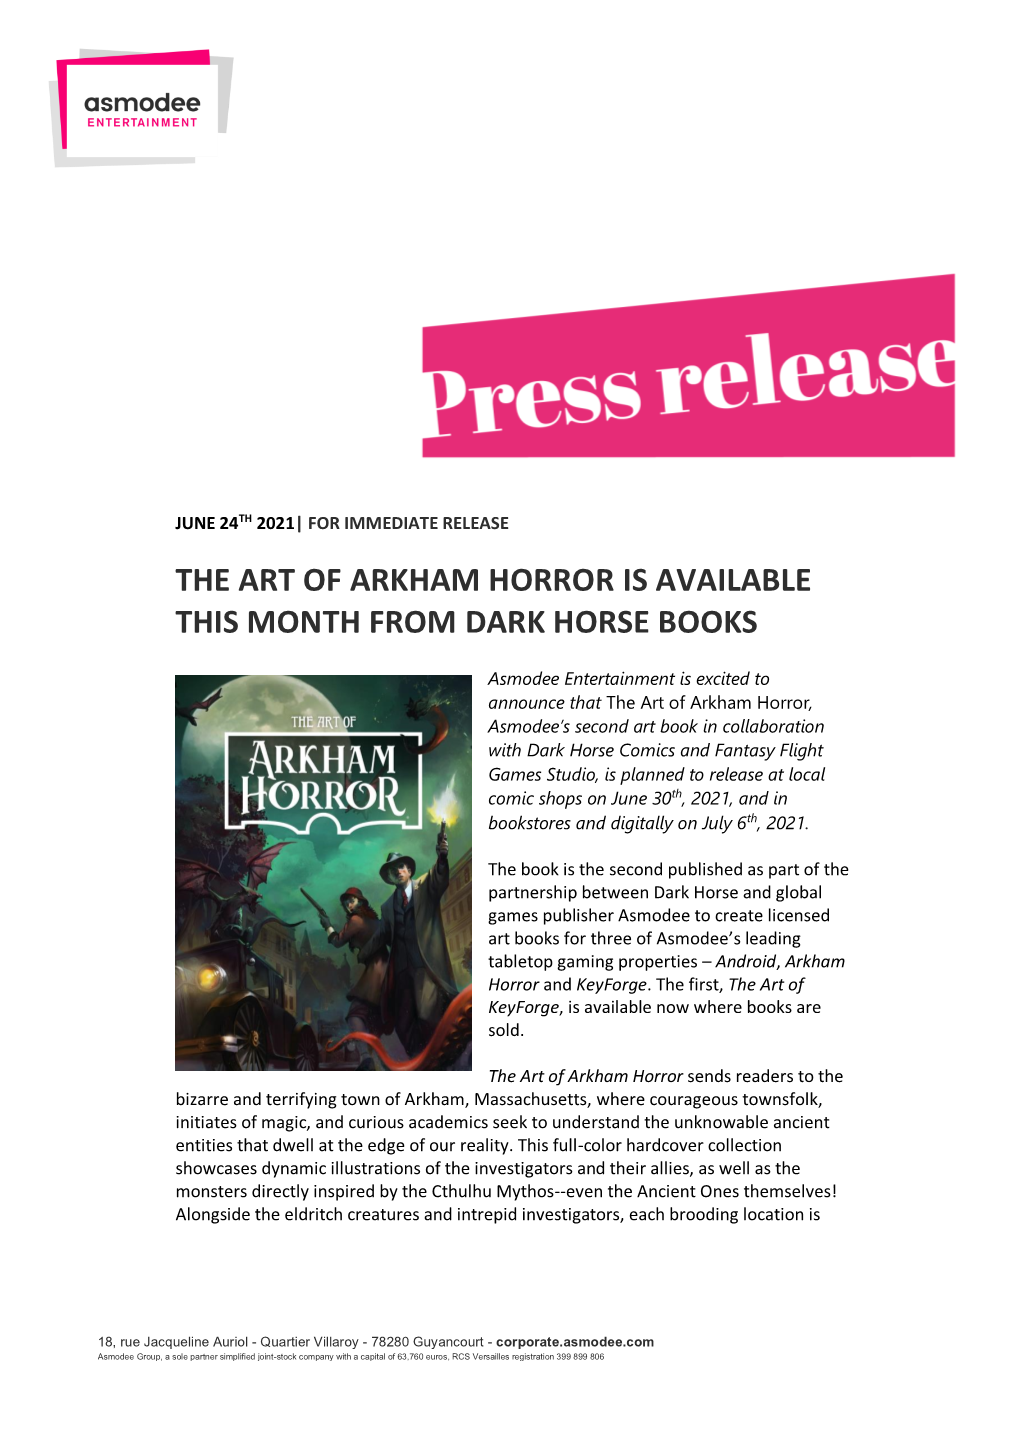 The Art of Arkham Horror Is Available This Month from Dark Horse Books